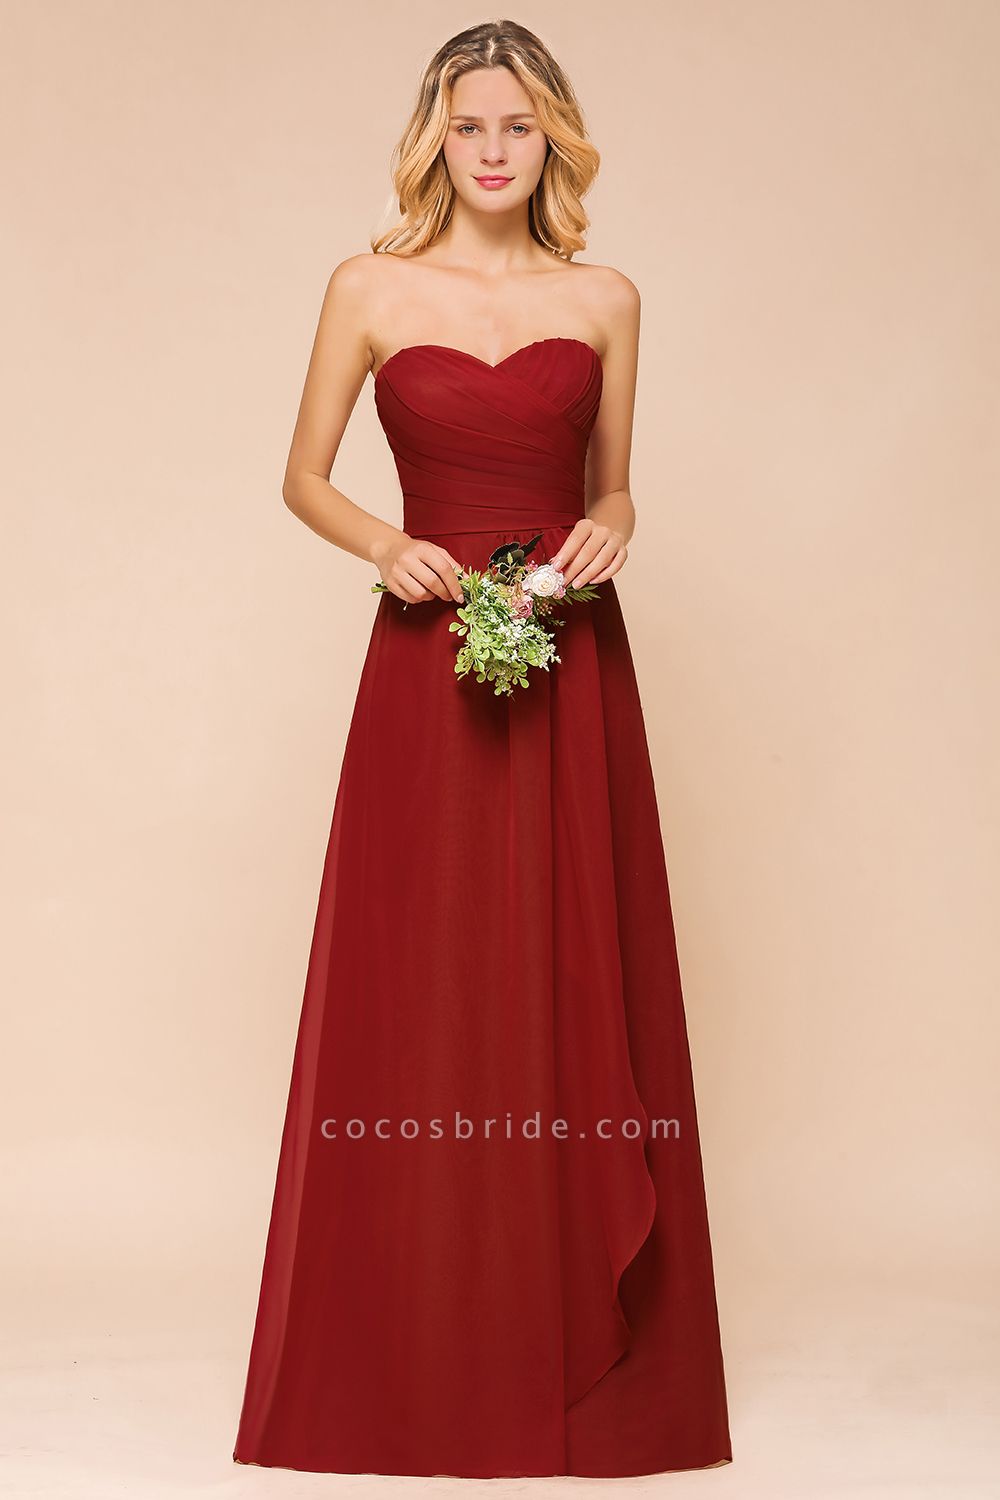 Simple A-Line Strapless Chiffon Backless Floor-length Bridesmaid Dress With Ruched